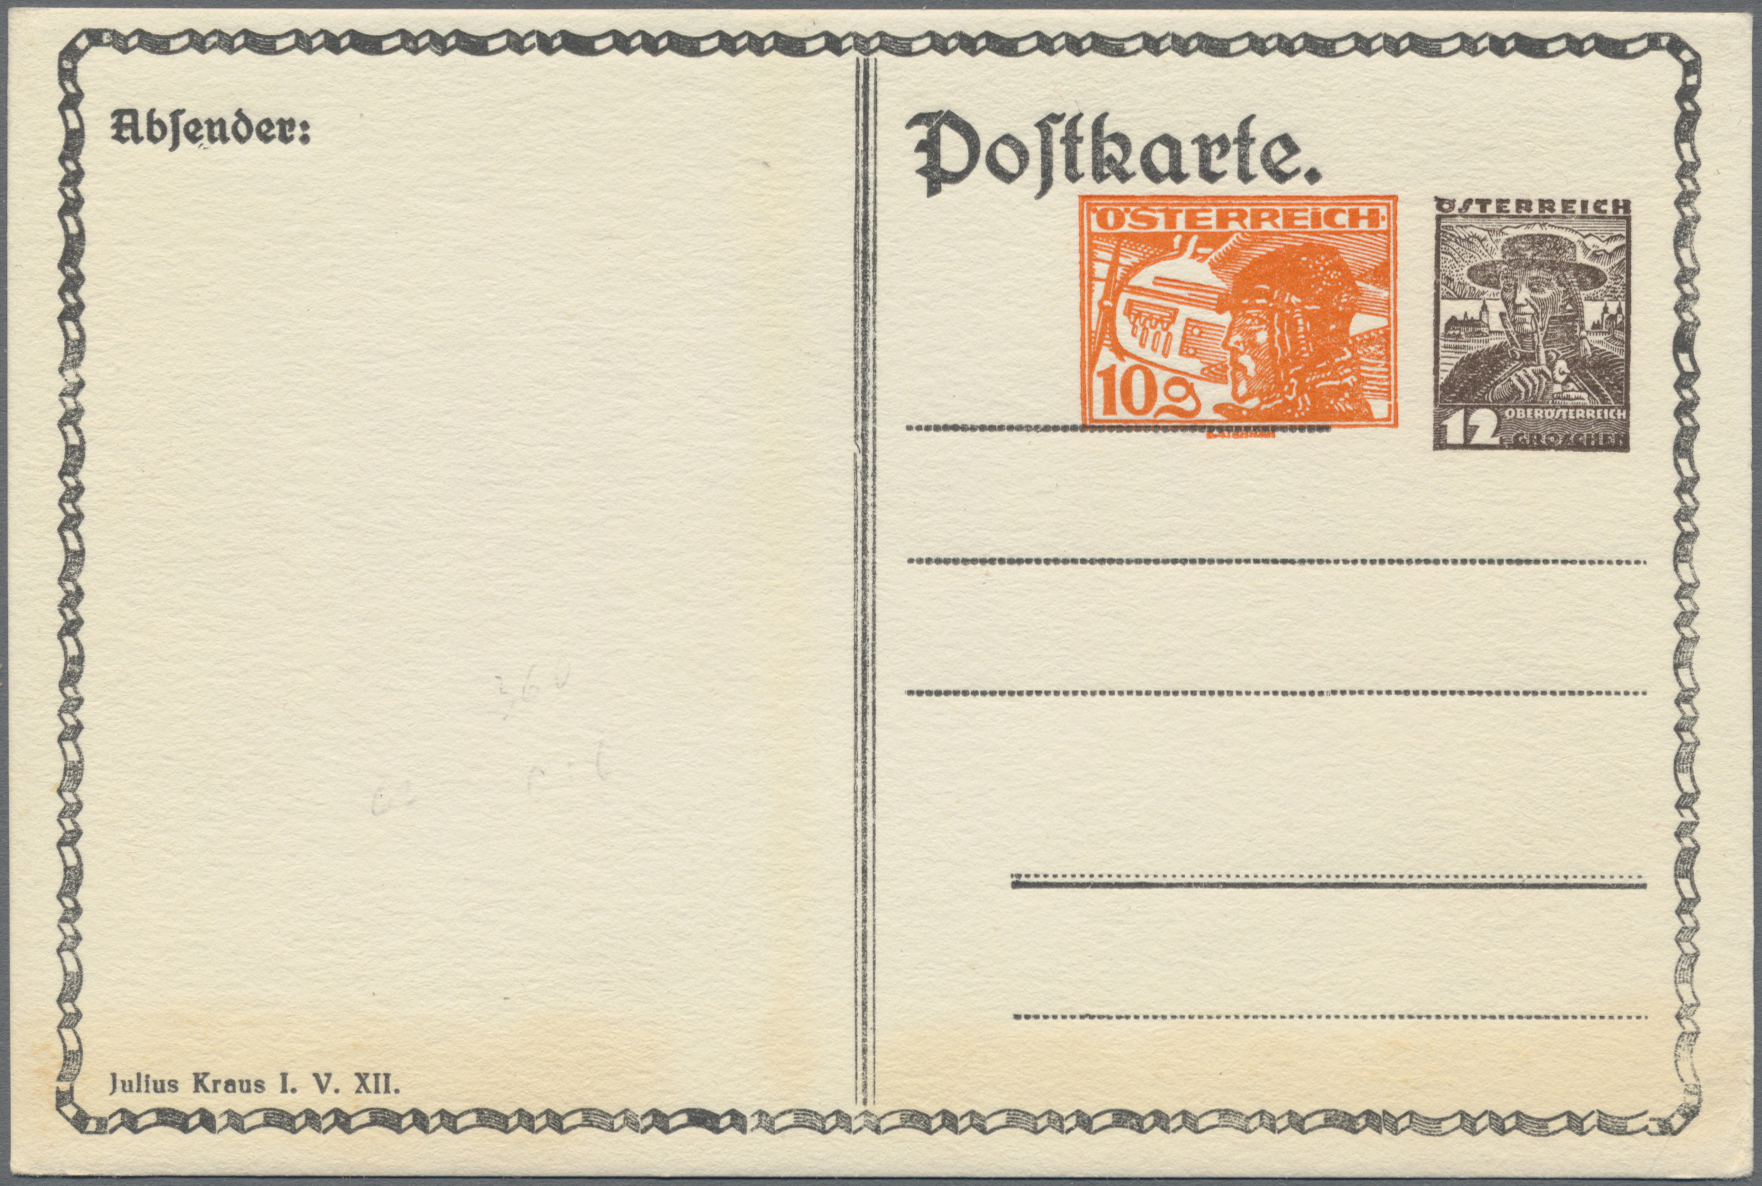 Lot 25847 - europa  -  Auktionshaus Christoph Gärtner GmbH & Co. KG 50th Auction Anniversary Auction - Day 6